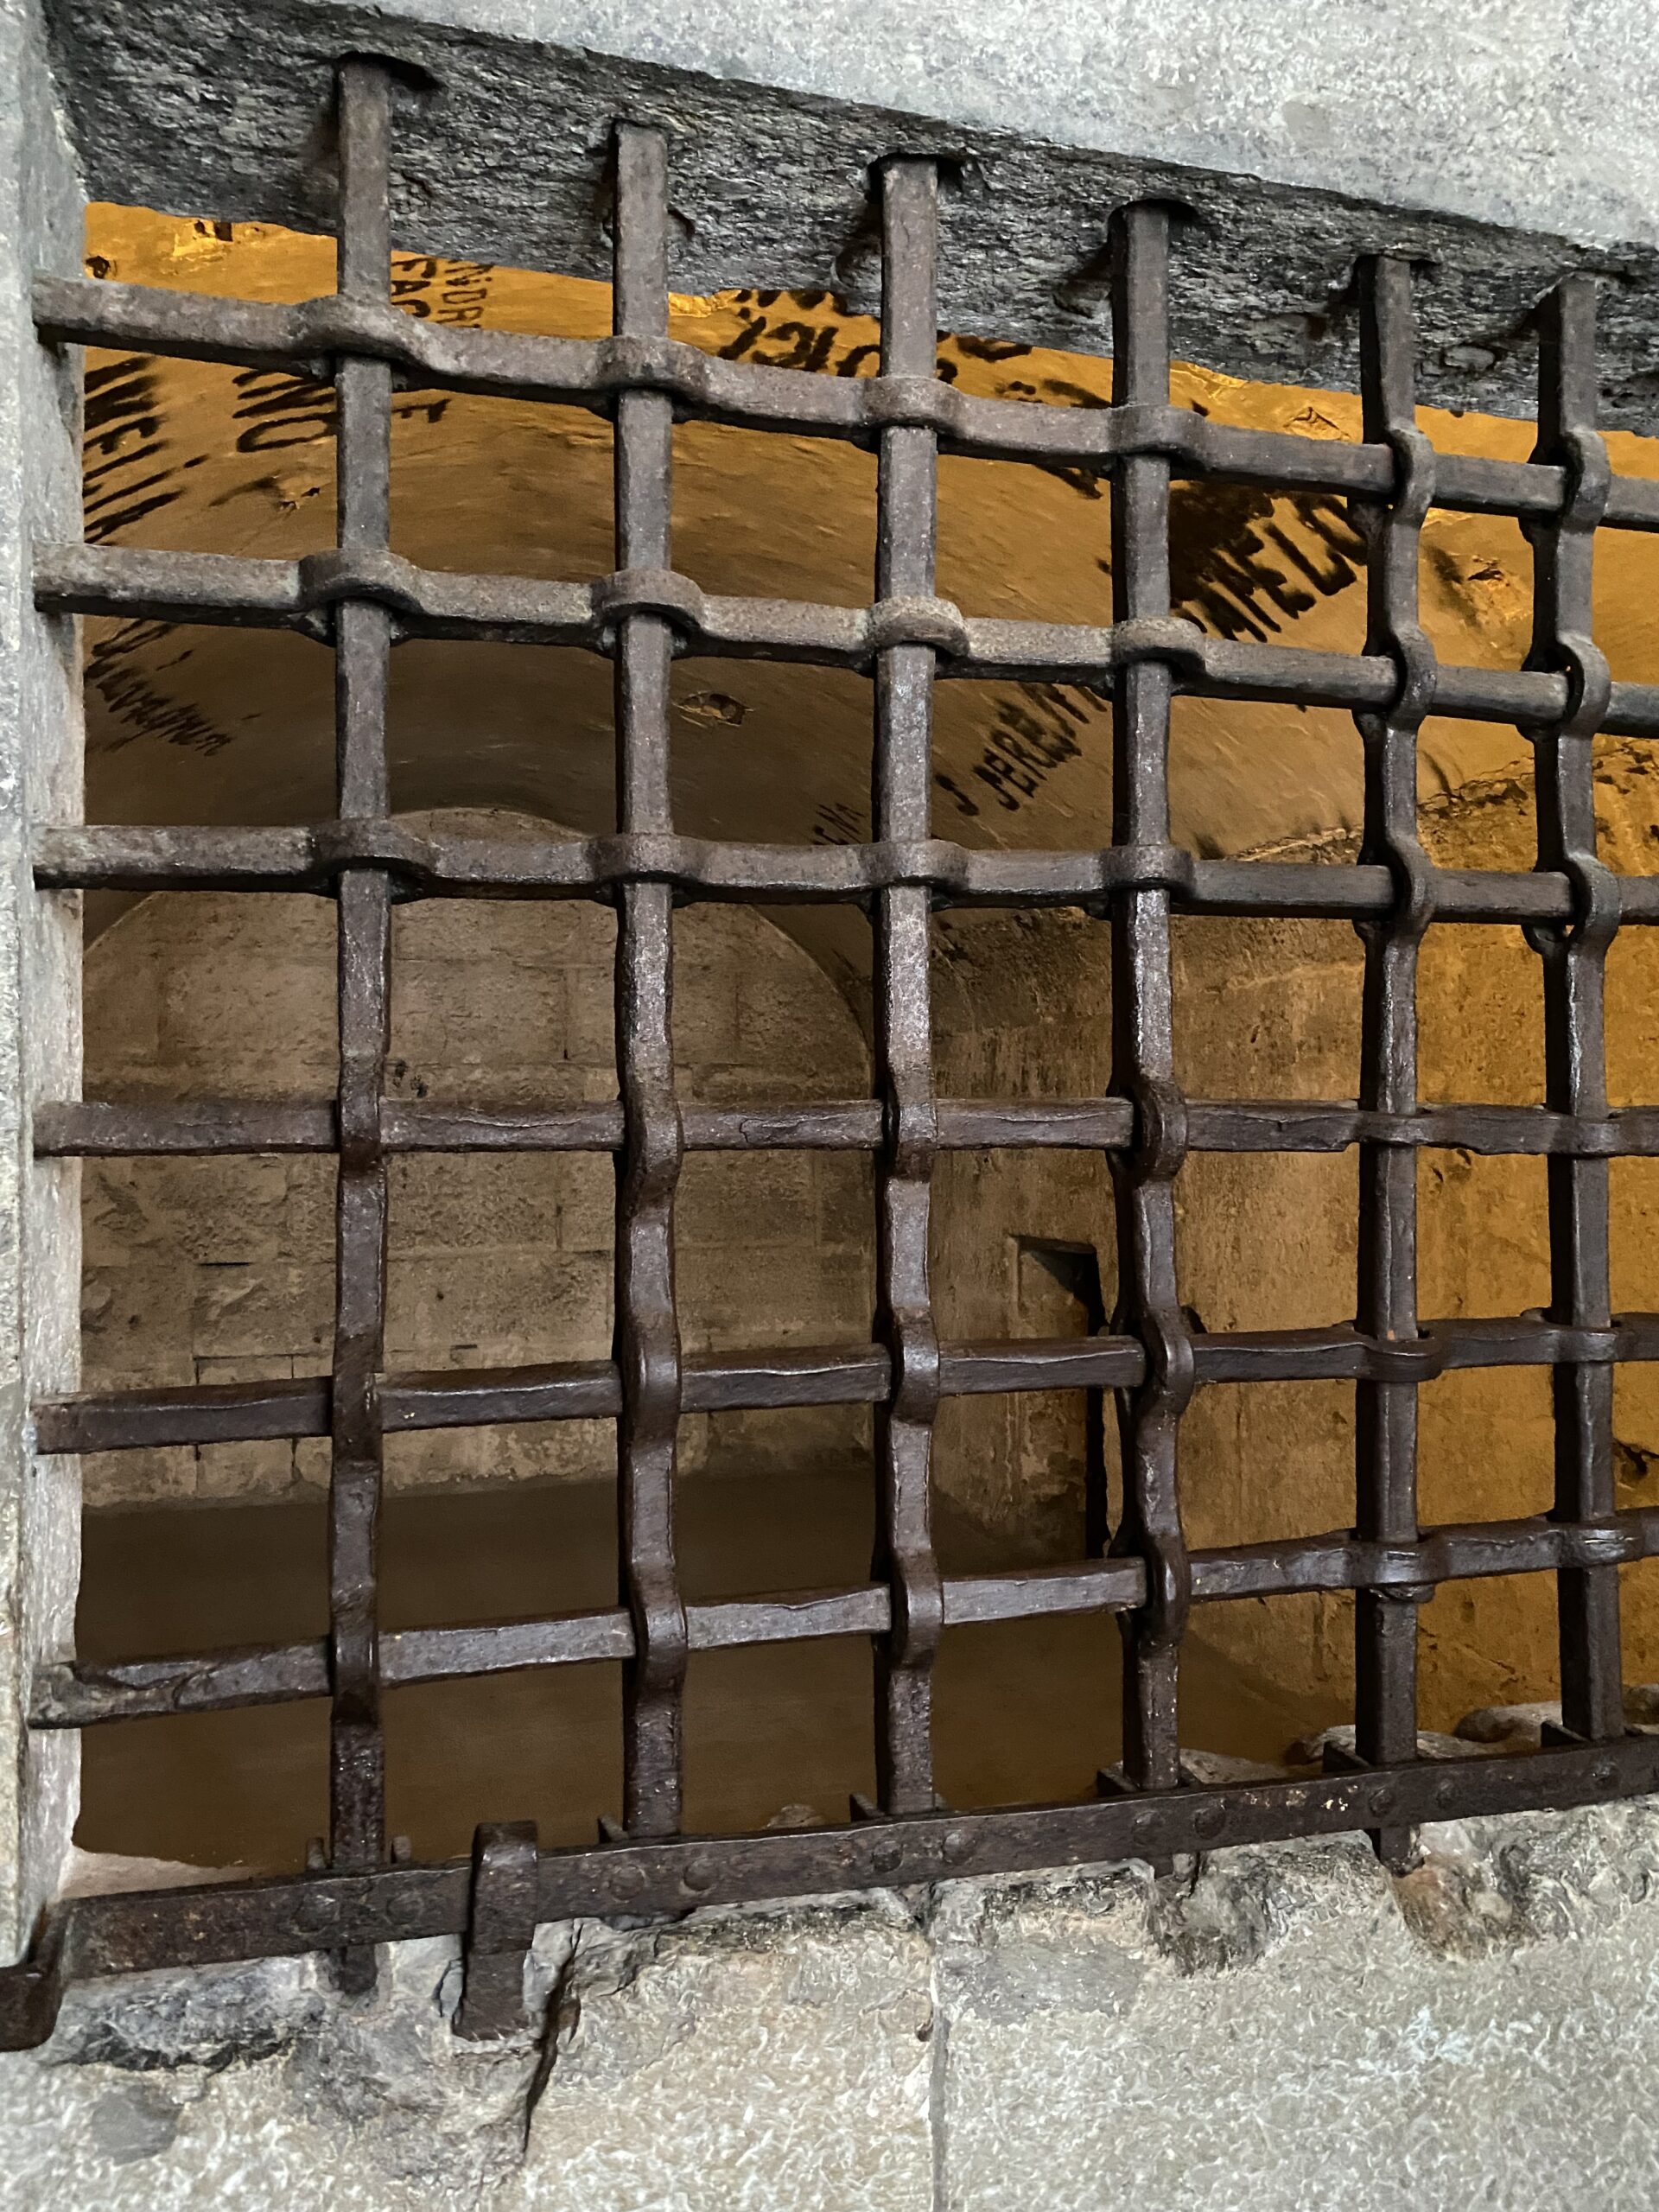 Stone prison cell through bars in Venice Italy's Doge's Palace